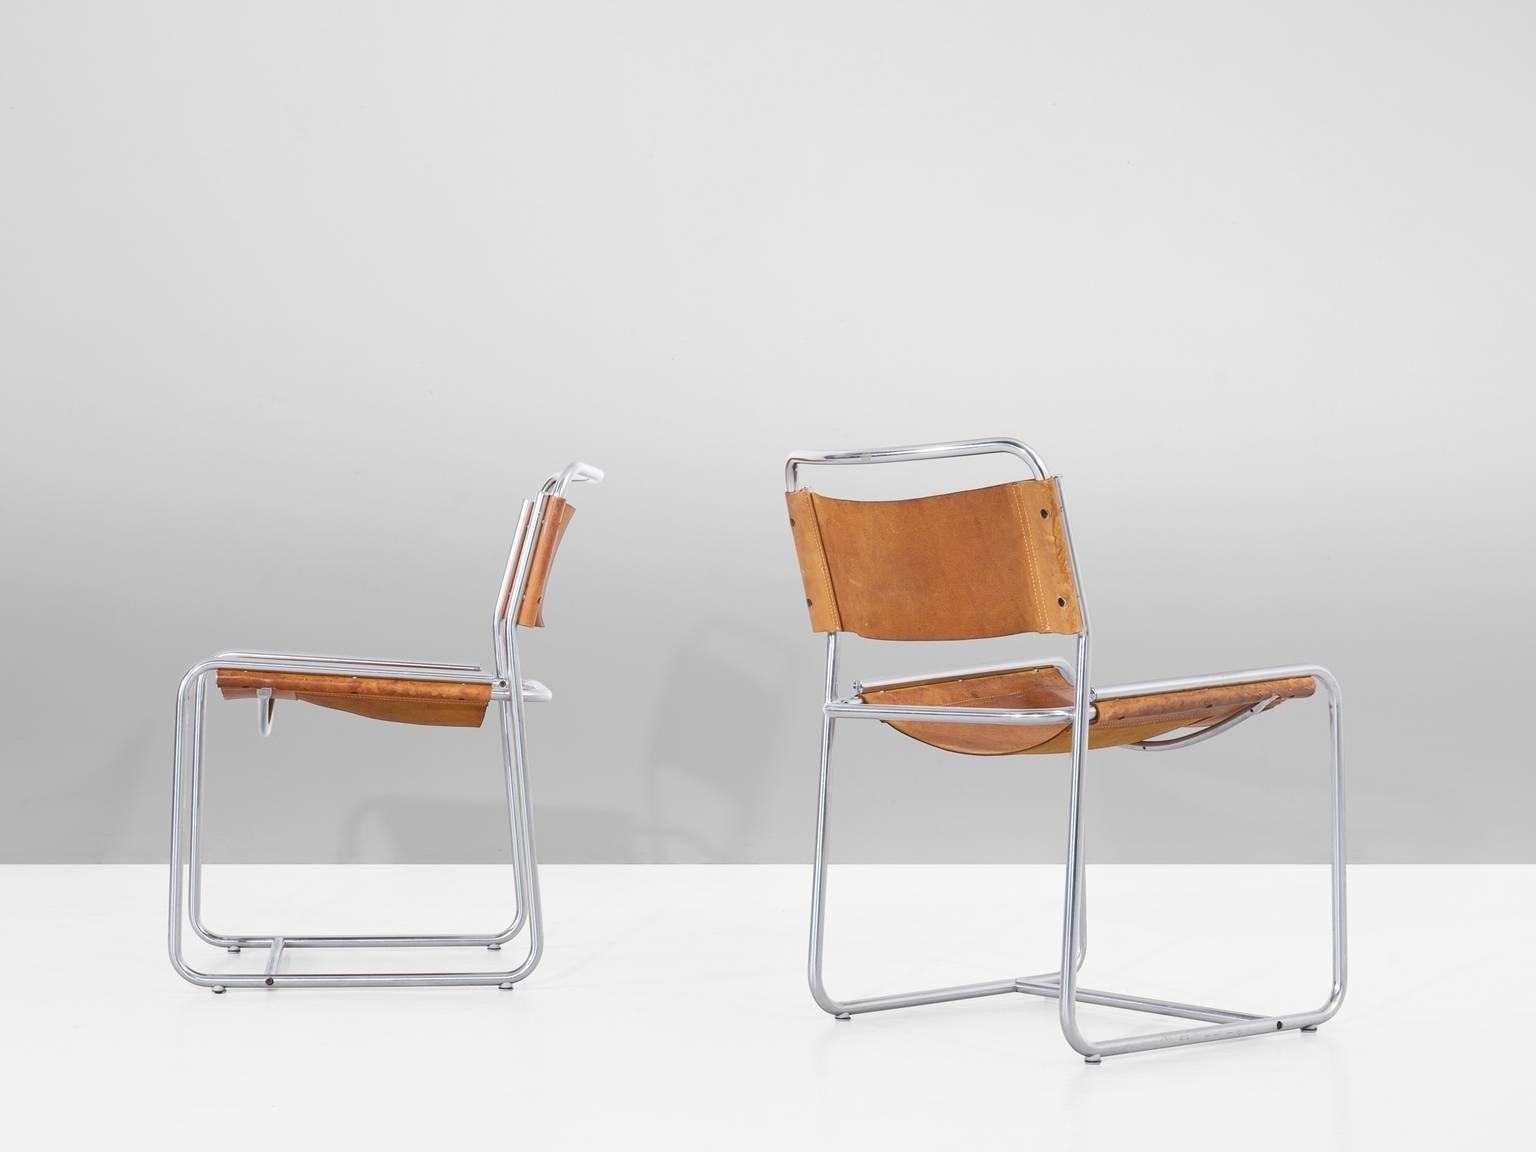 European Clair Bataille & Paul Ibens Set of 6 Tubular Chairs in Cognac for 't Spectrum 